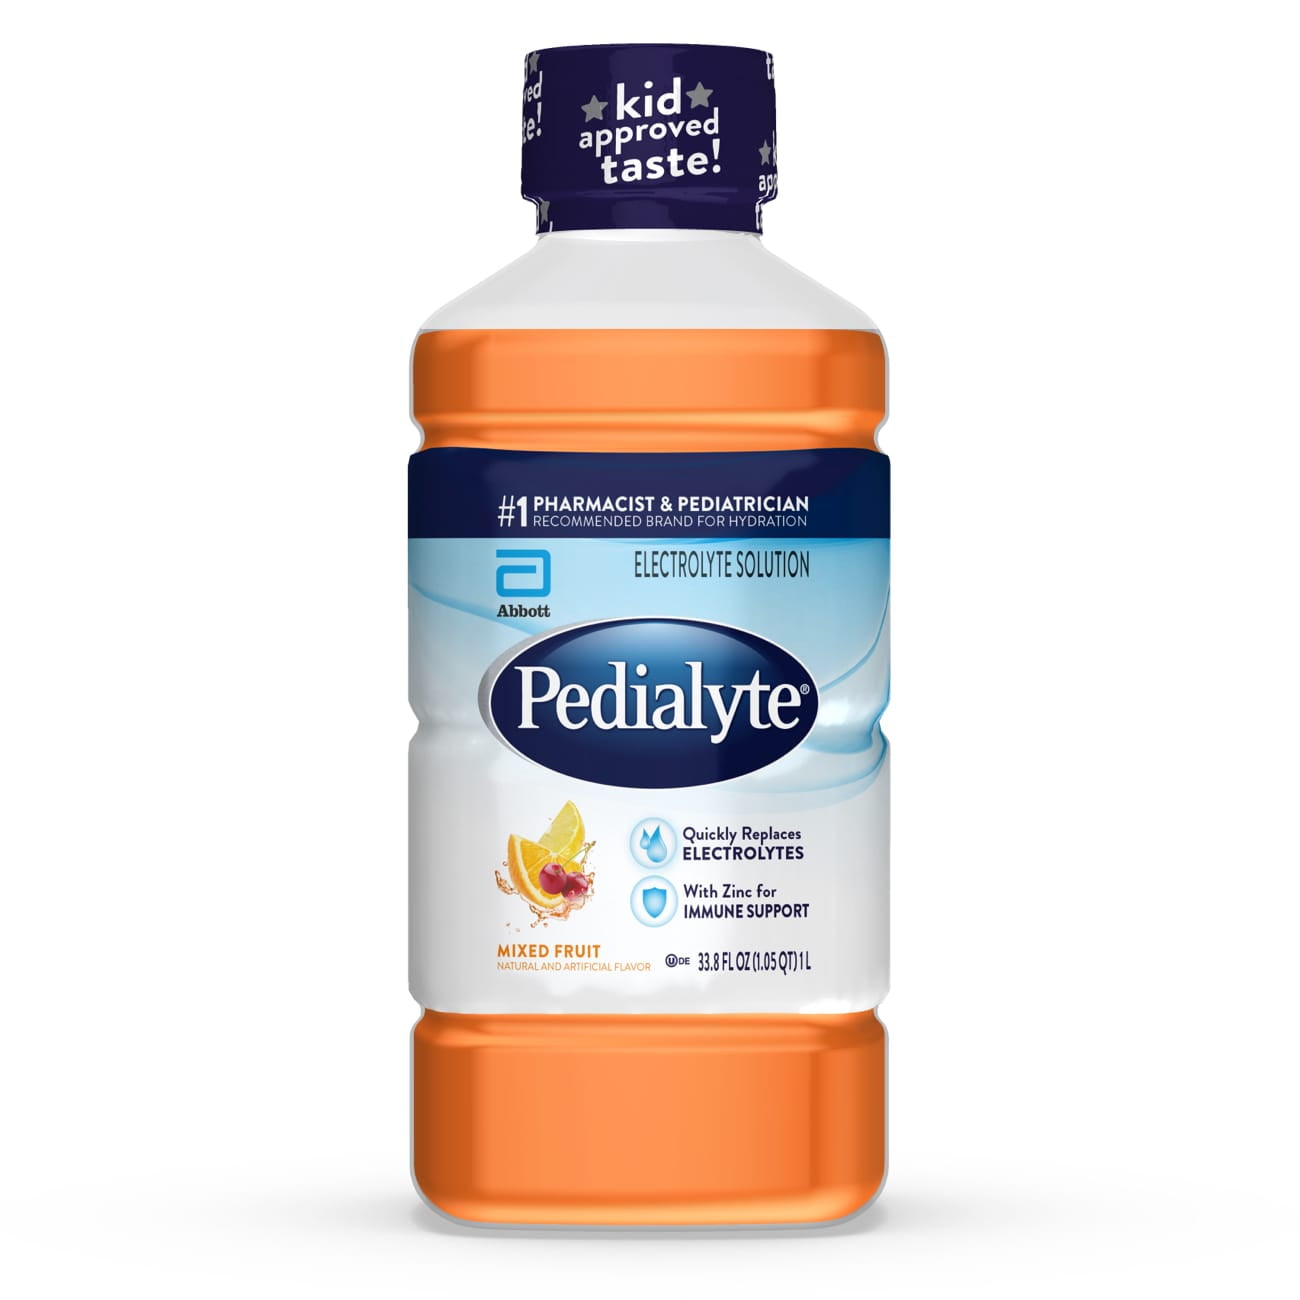 Pedialyte Electrolyte Solution, Mixed Fruit, Hydration Drink, 1 Liter